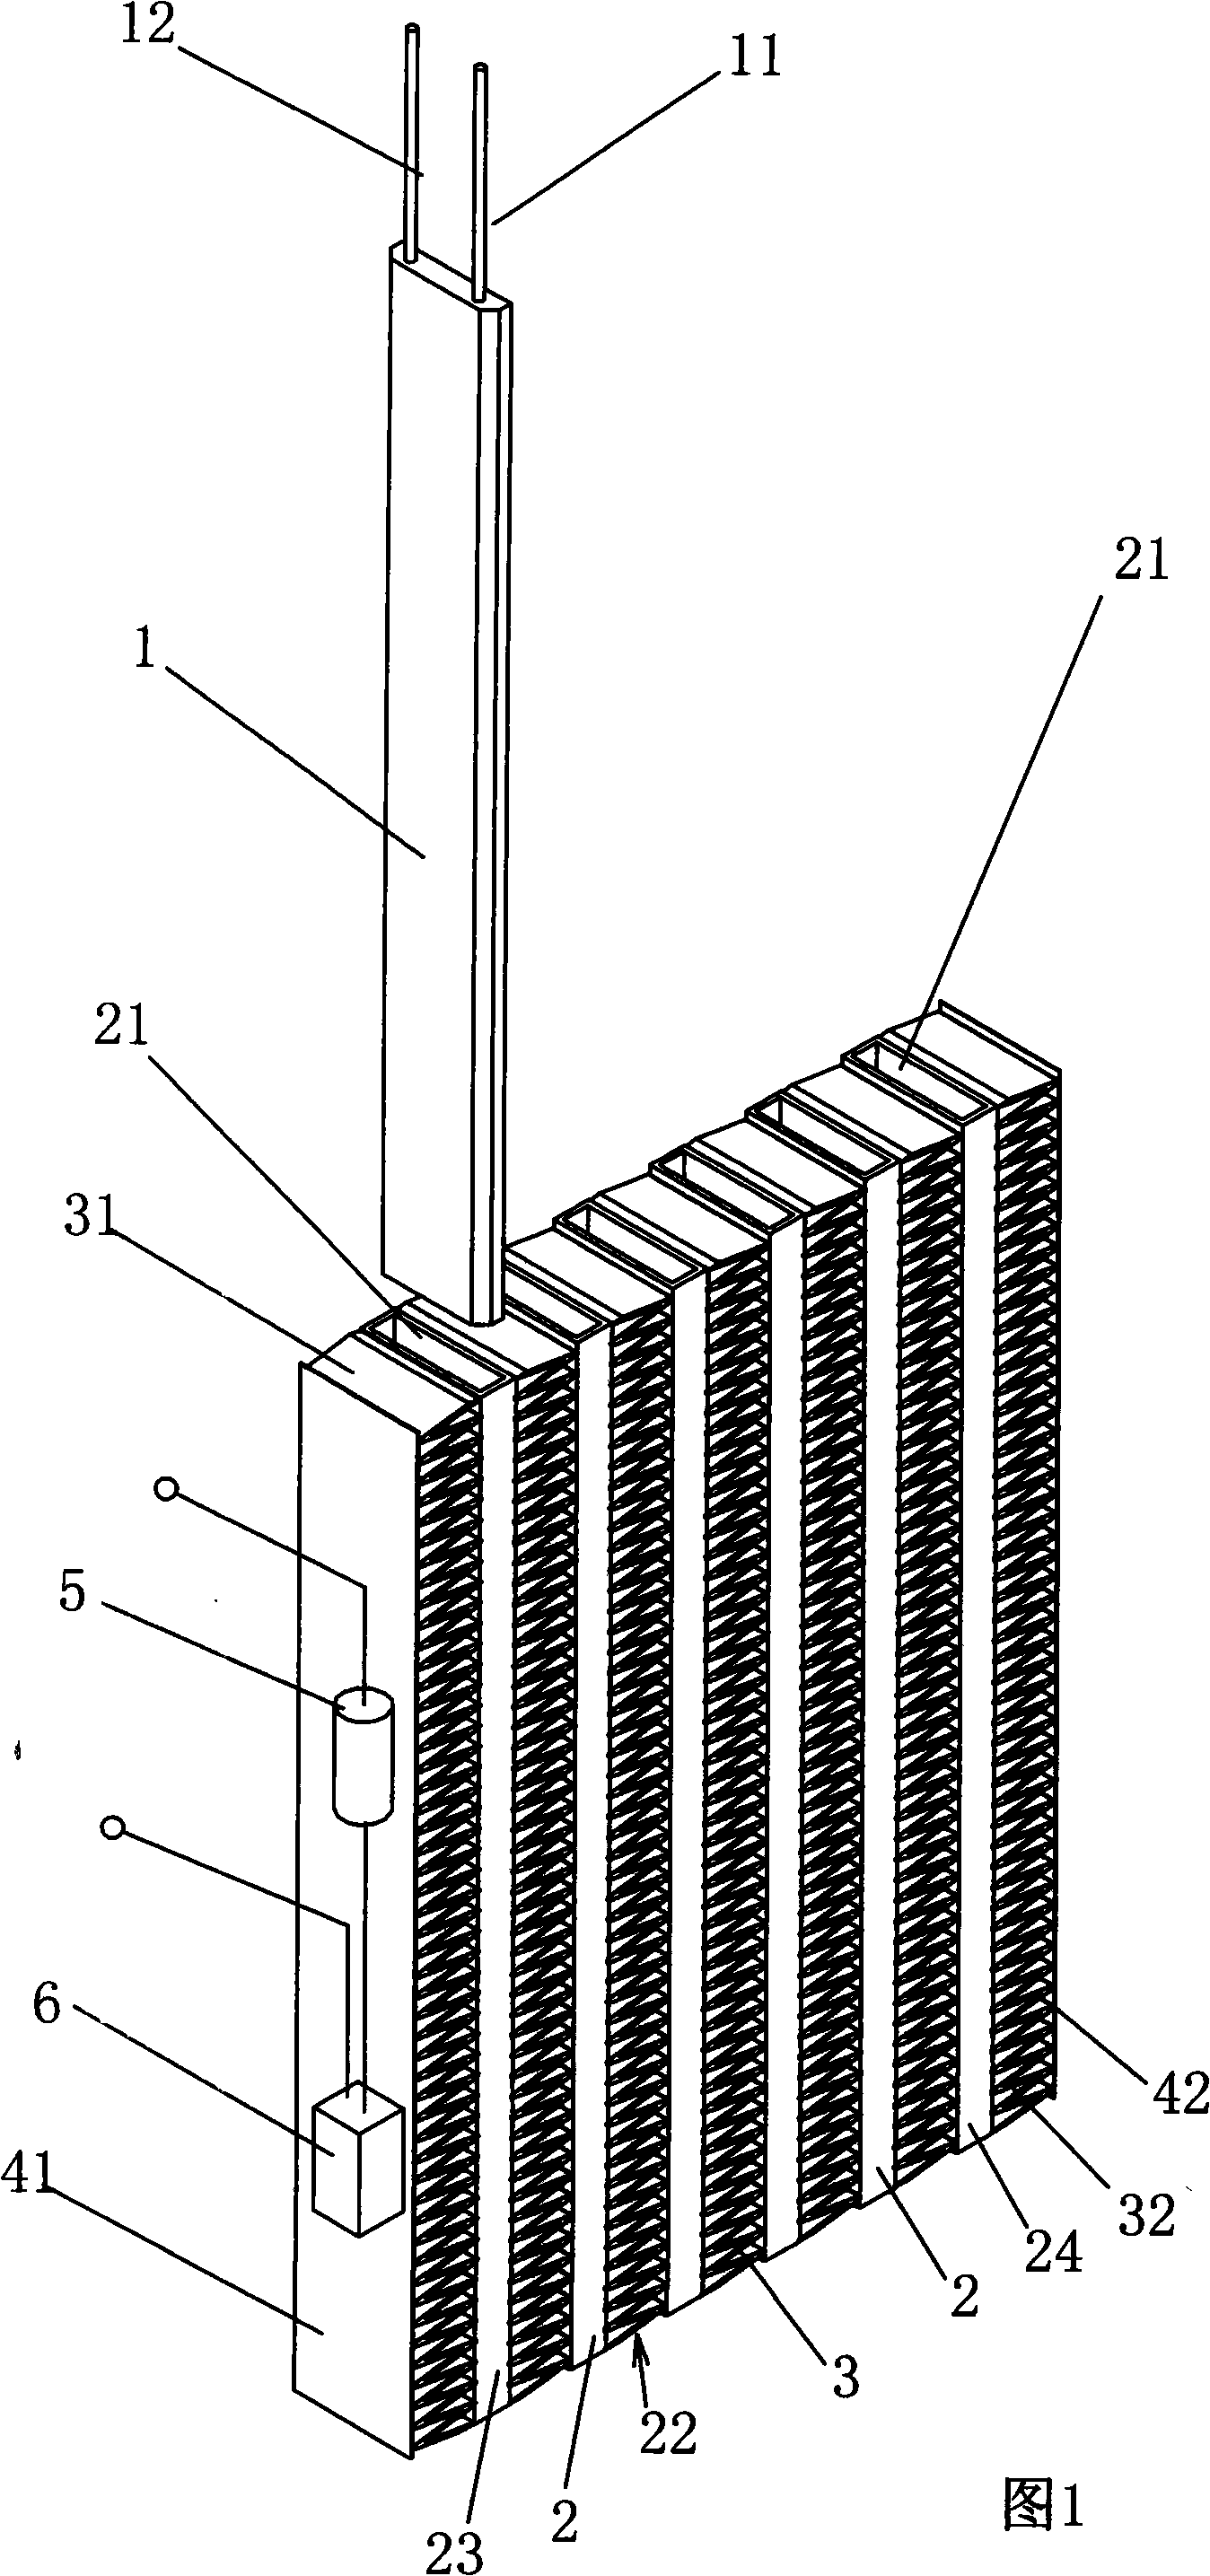 Electric-heating device and uses thereof